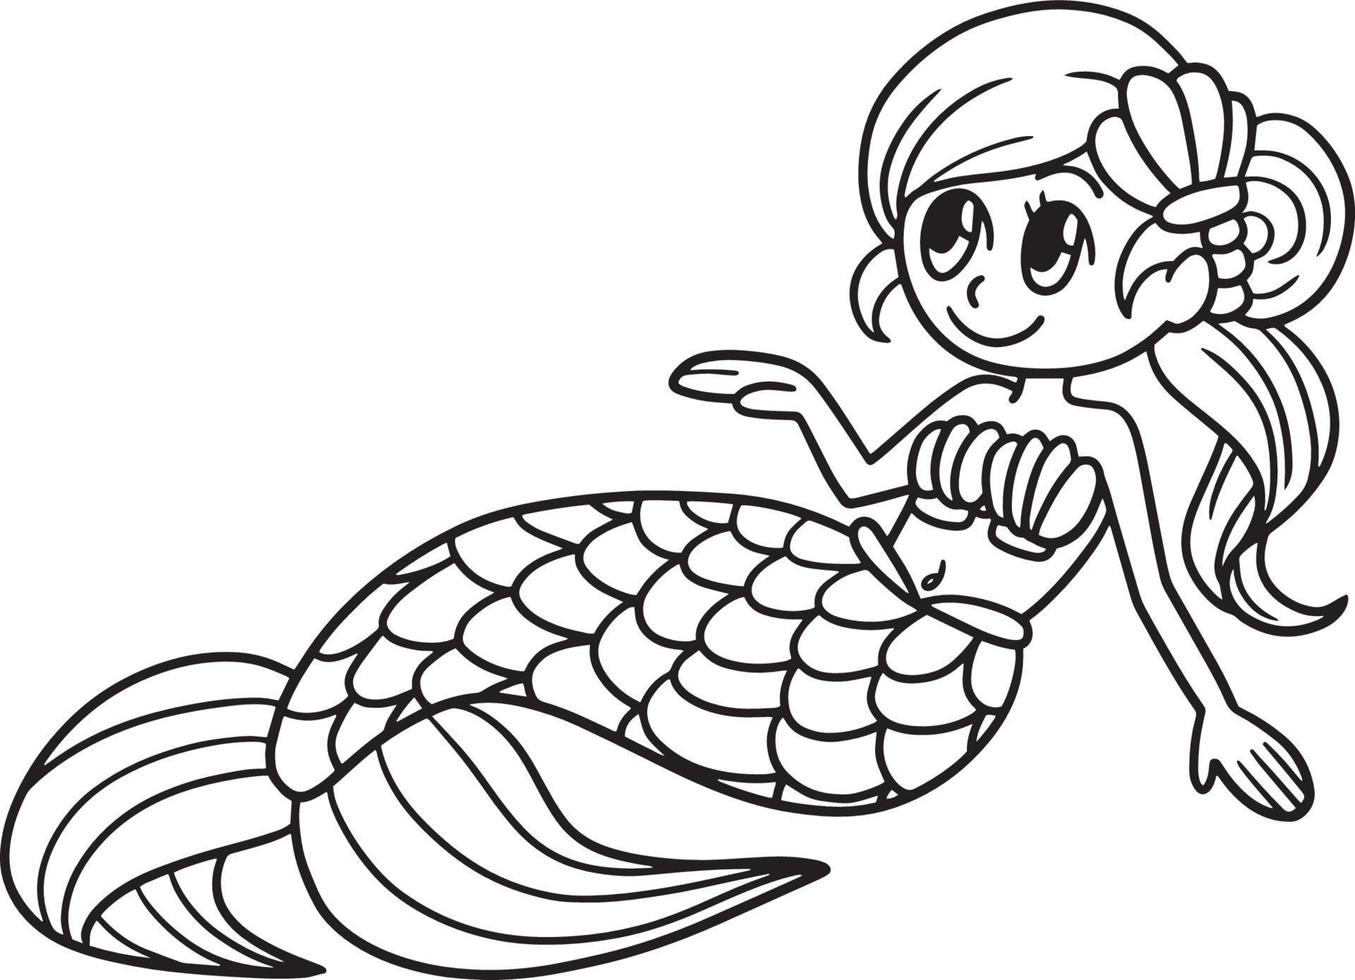 Sitting Mermaid Isolated Coloring Page for Kids vector